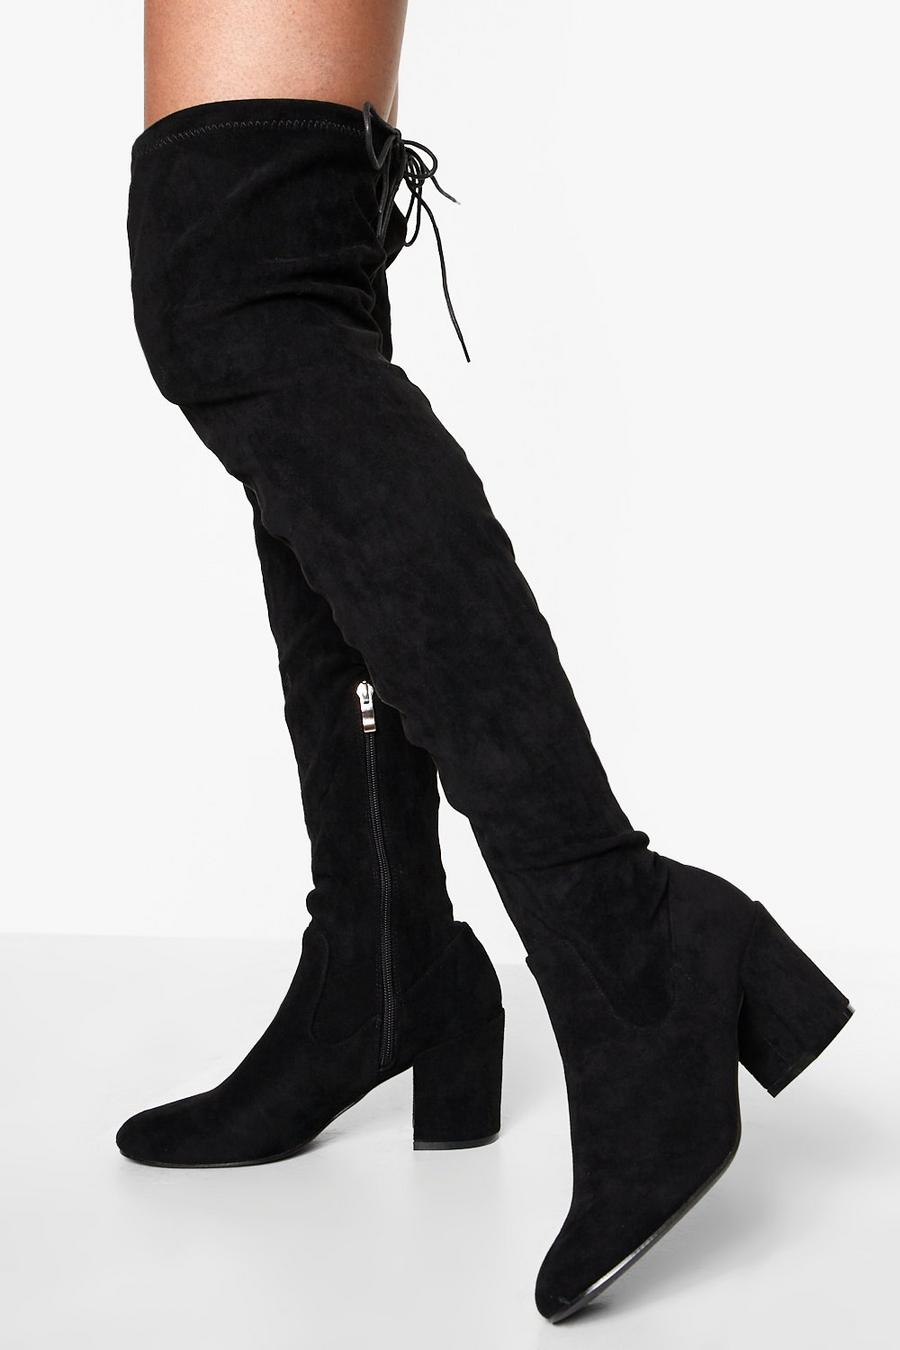 13 Thigh High Boots For Thick Thighs Starting At $37 –, 51% OFF